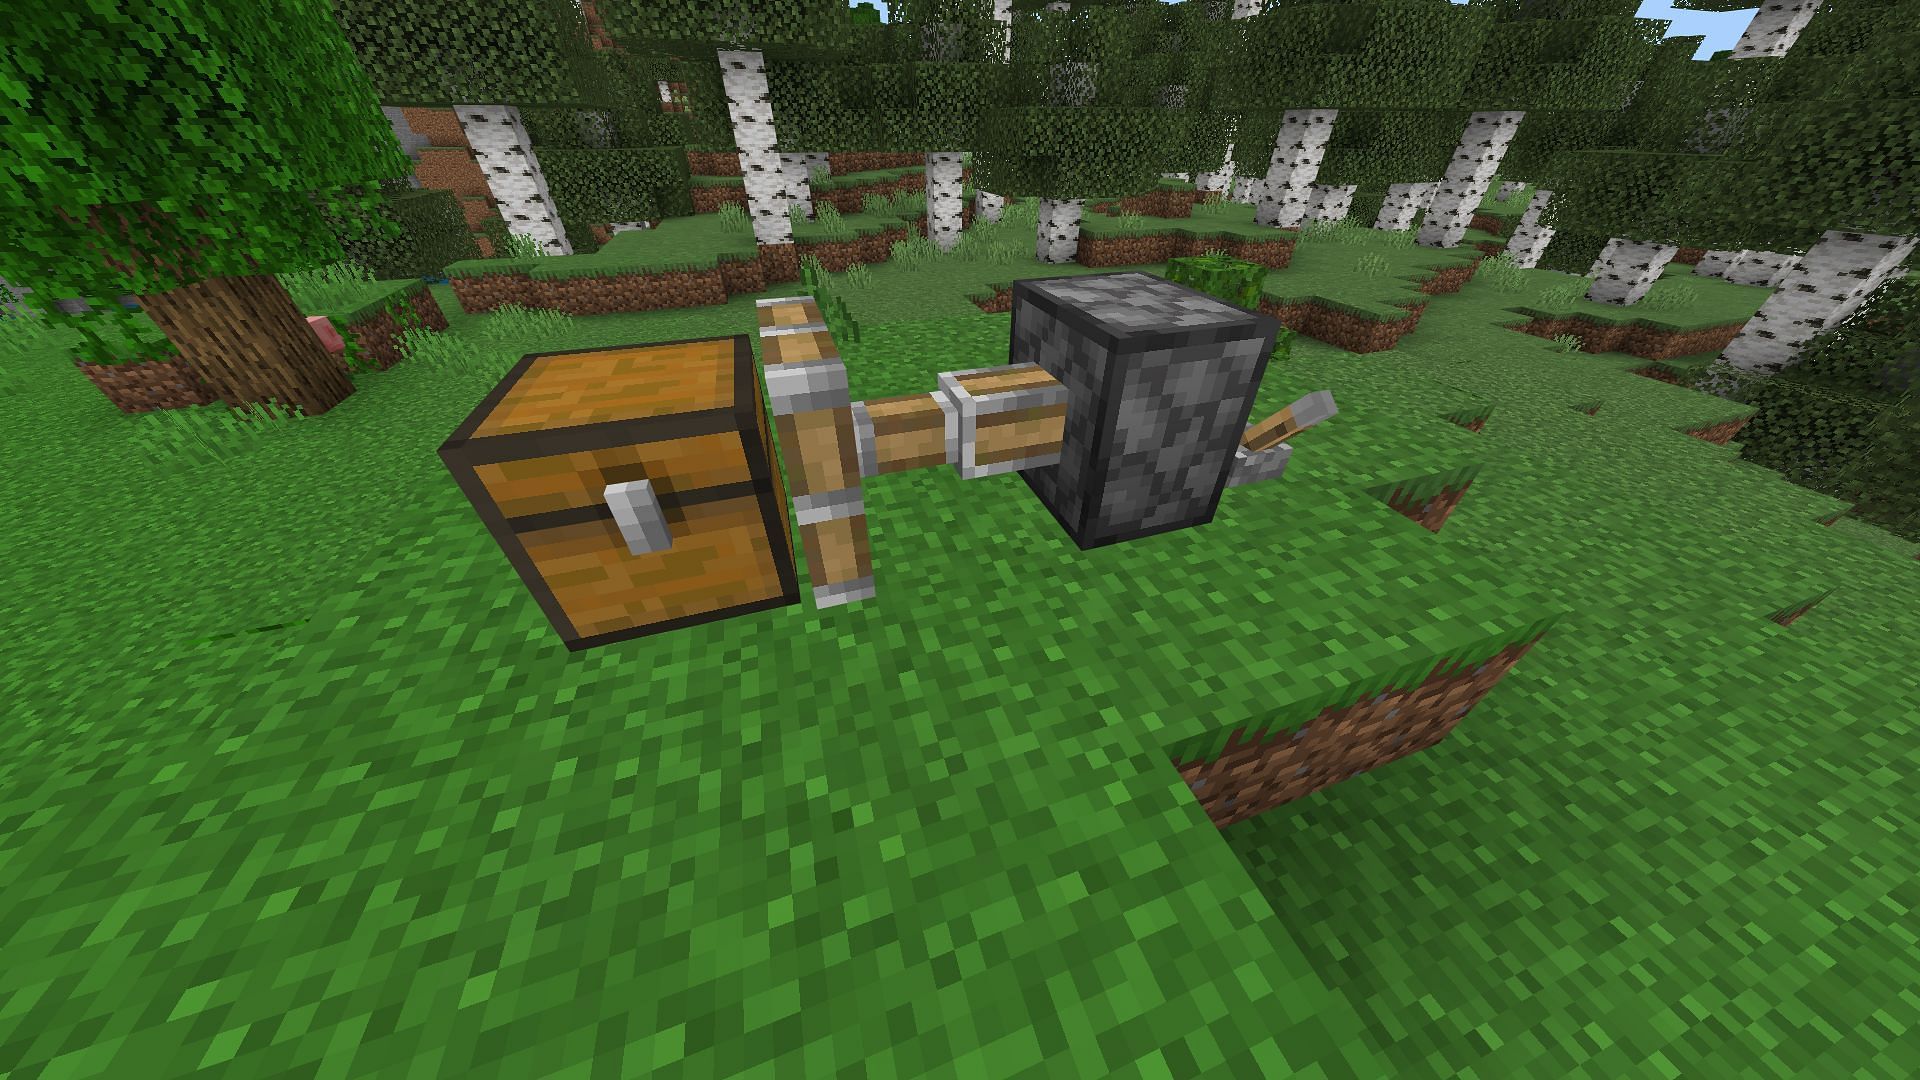 Tile entities like chests can be moved by pistons (Image via Mojang Studios)